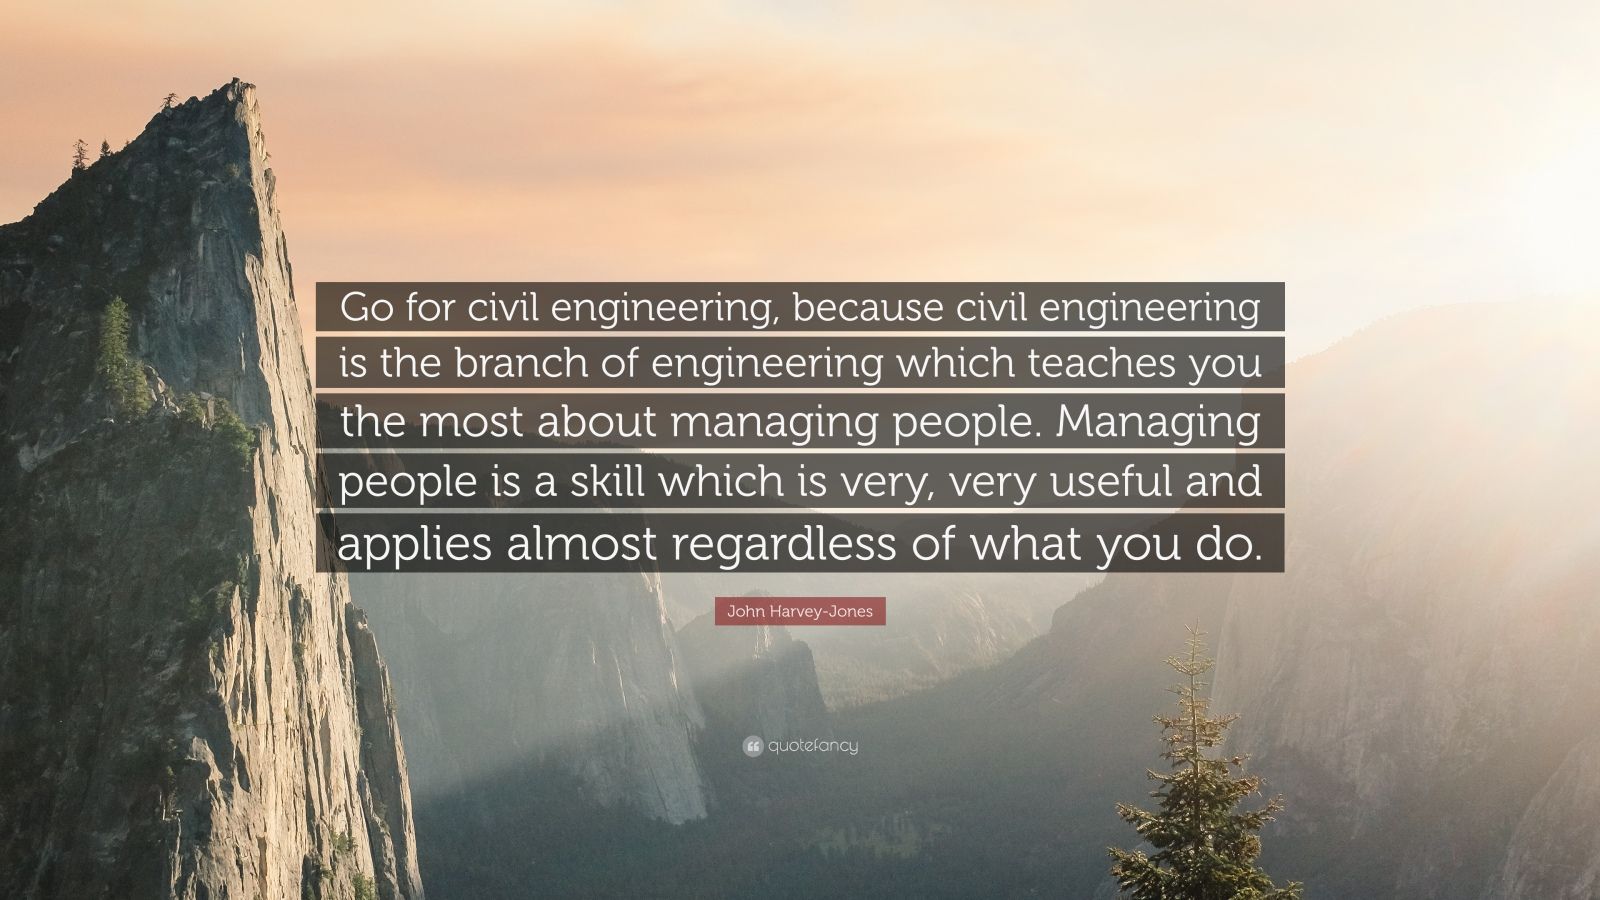 65 Inspirational Quotes About Civil Engineering